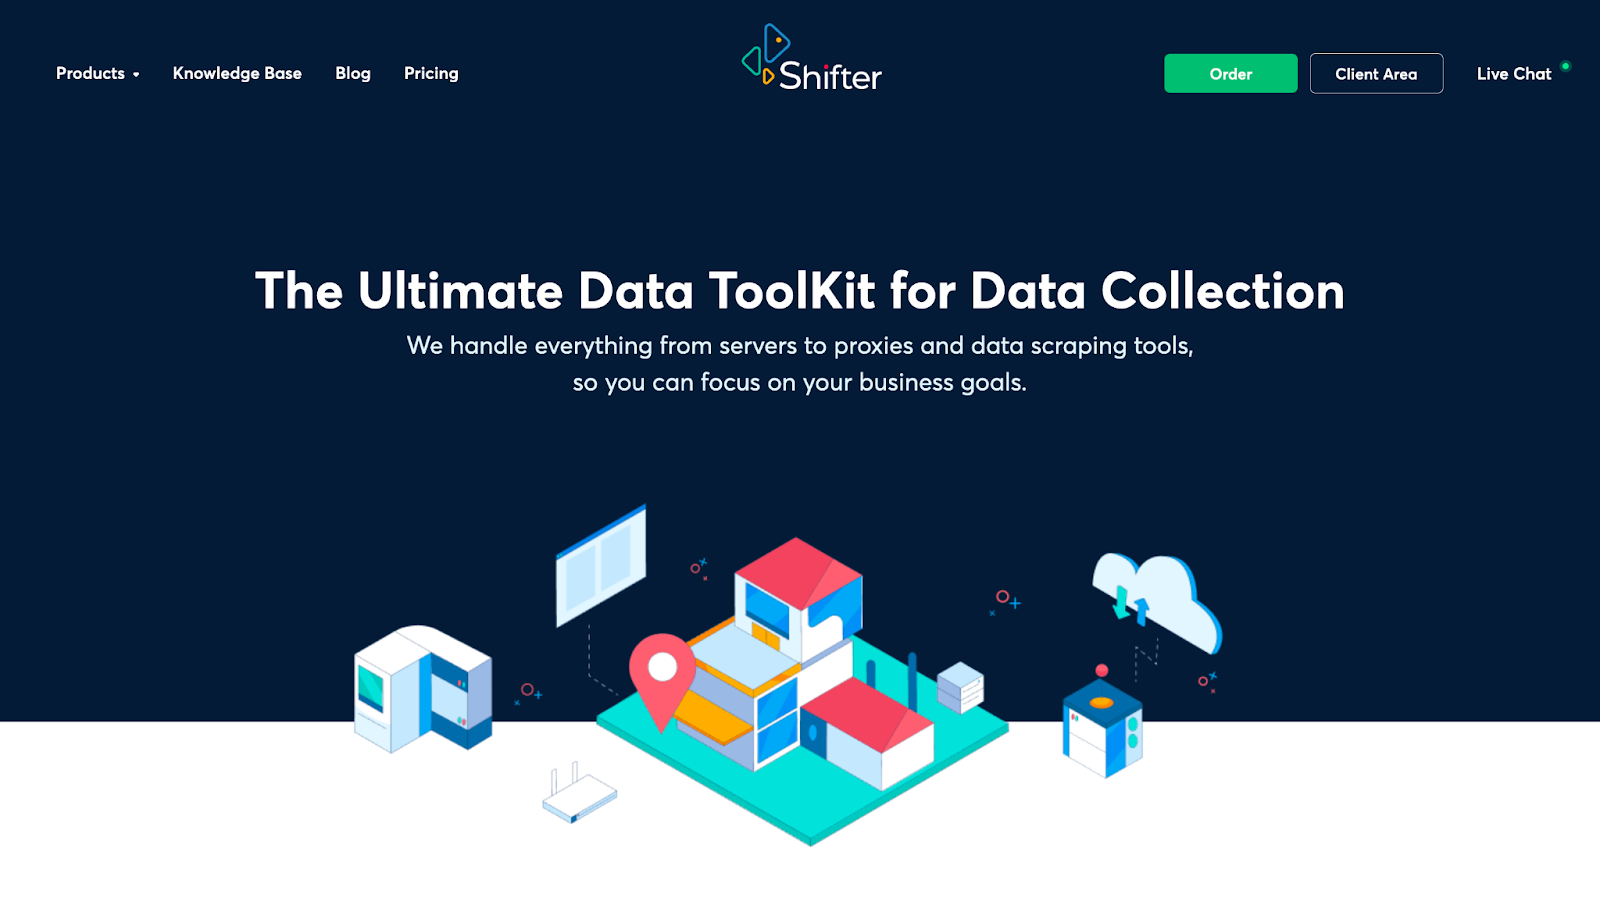 shifter data collection toolkit